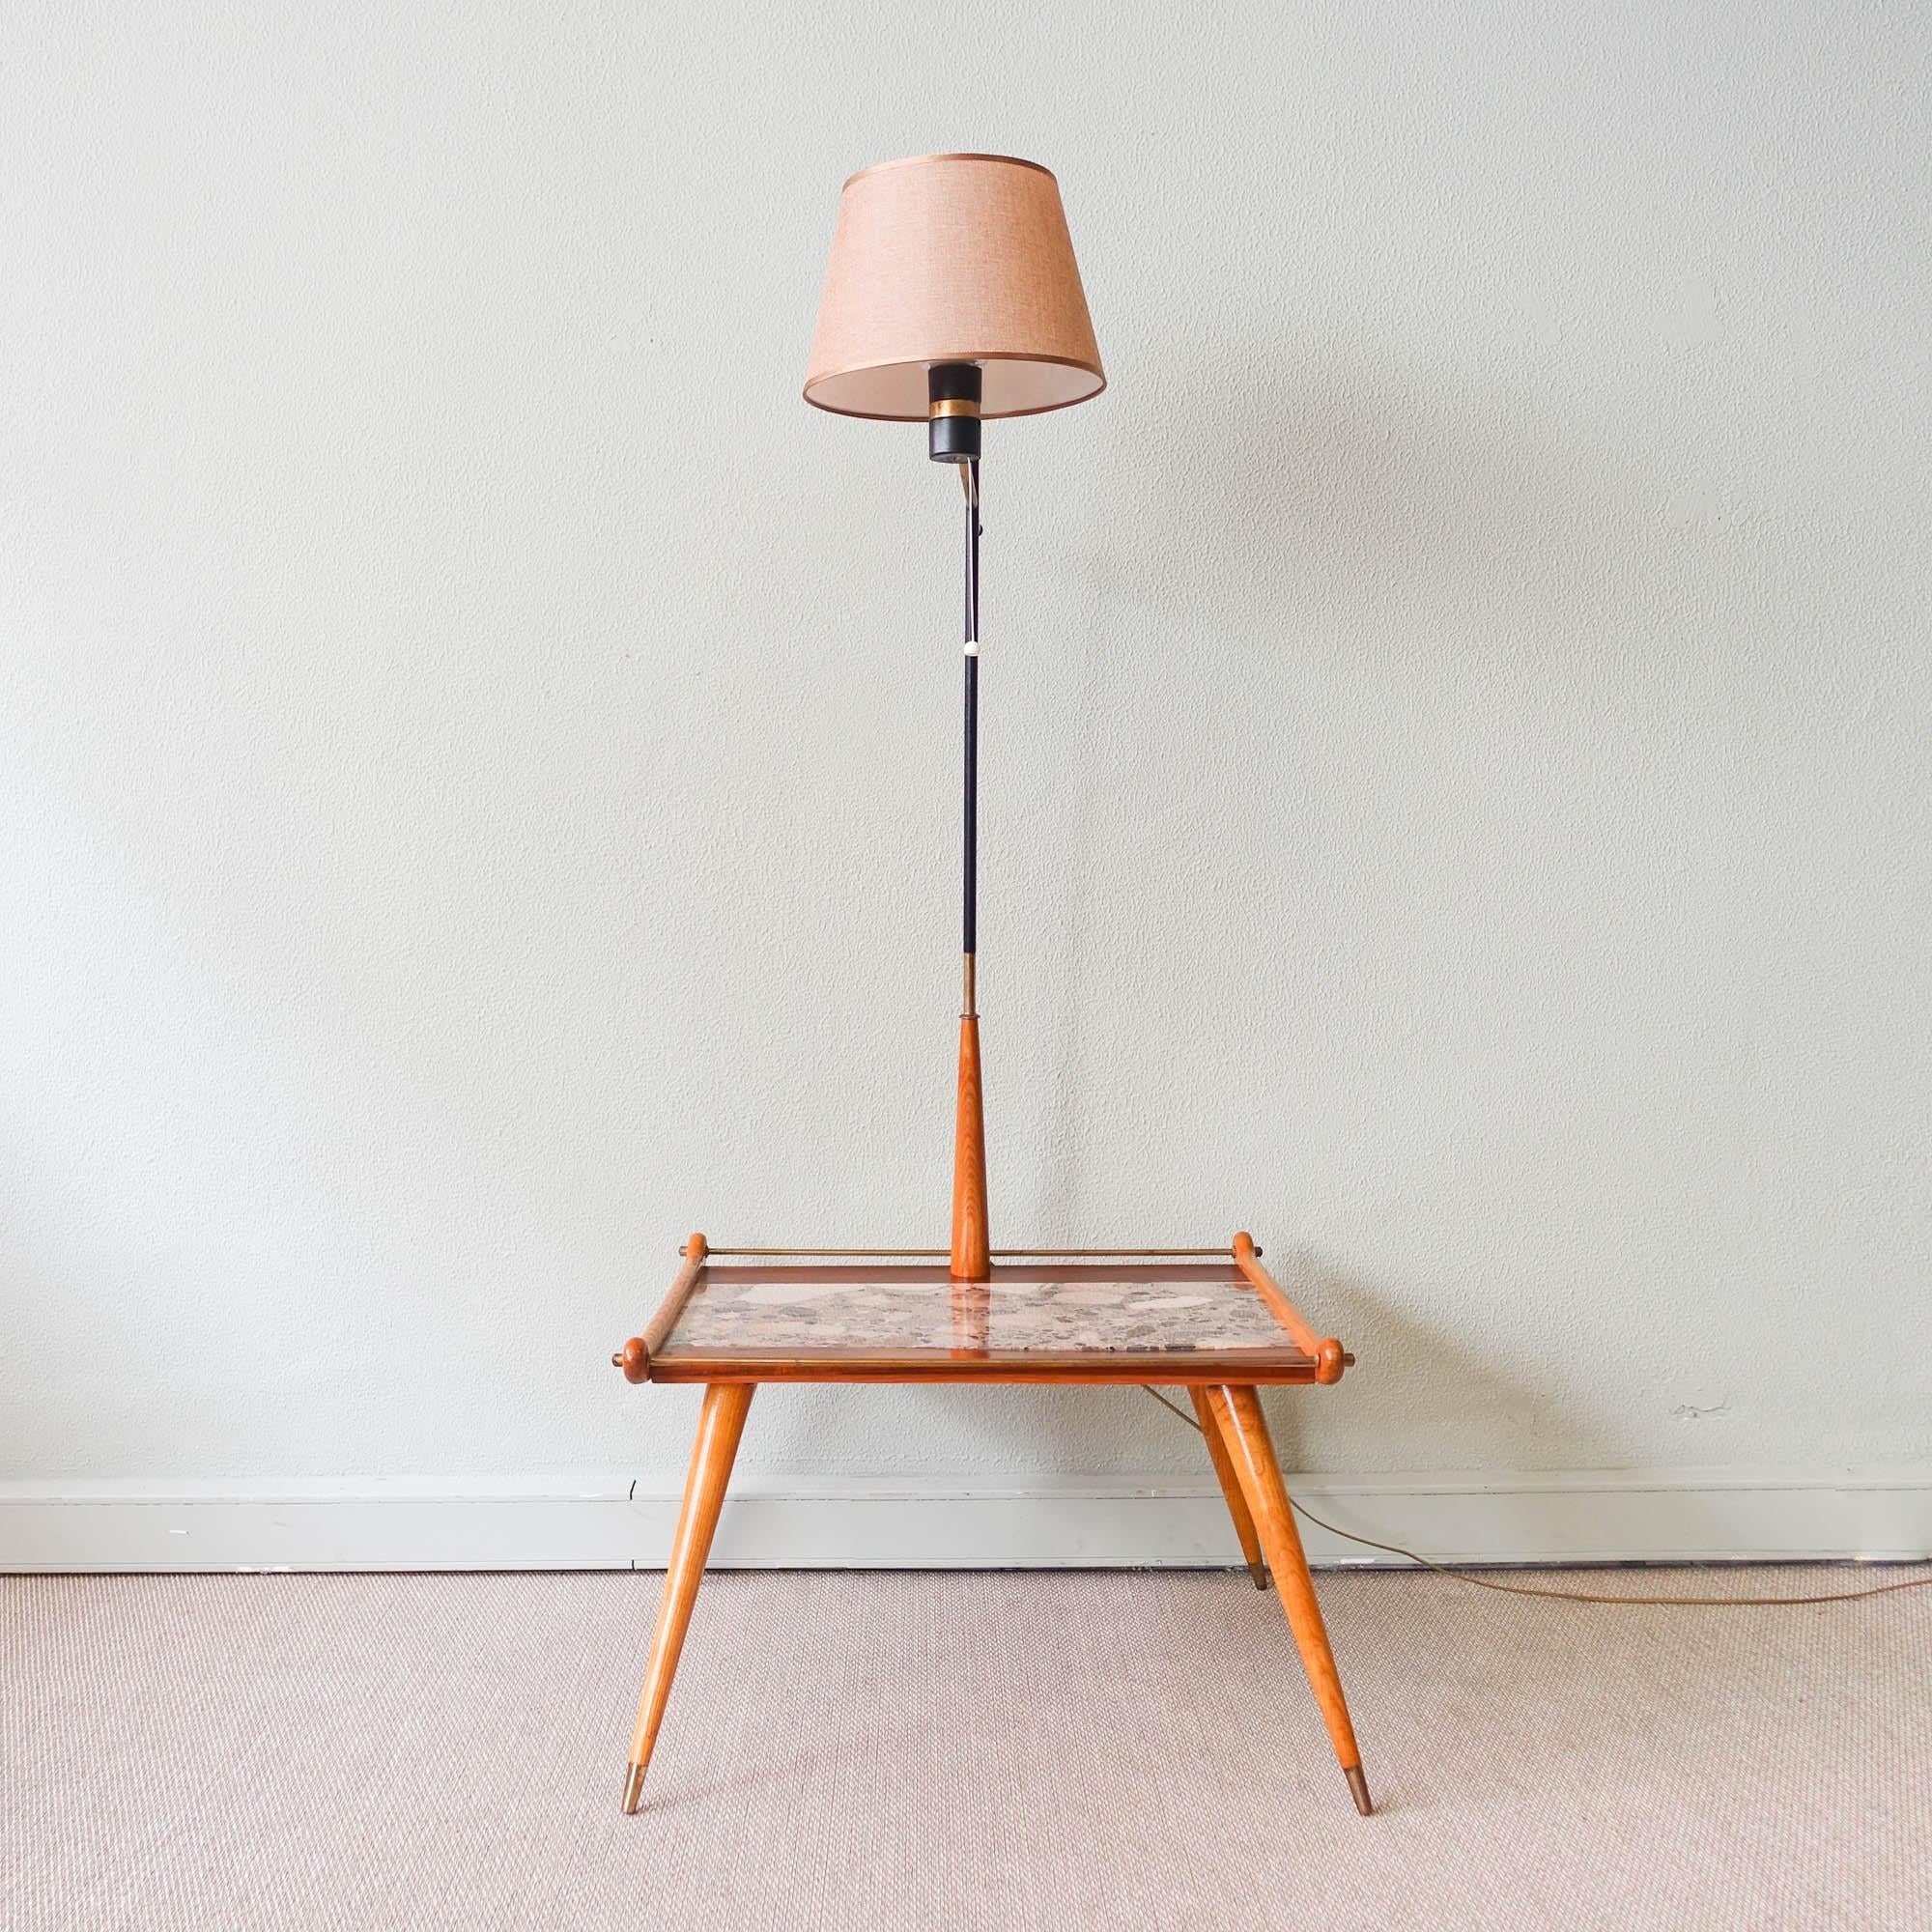 This floor lamp with intergrated table is original from the 1950's and was produced in Portugal. It has the original lampshade. The feet are in ash with brass tips and the top of the table is in Undianuno wood and 